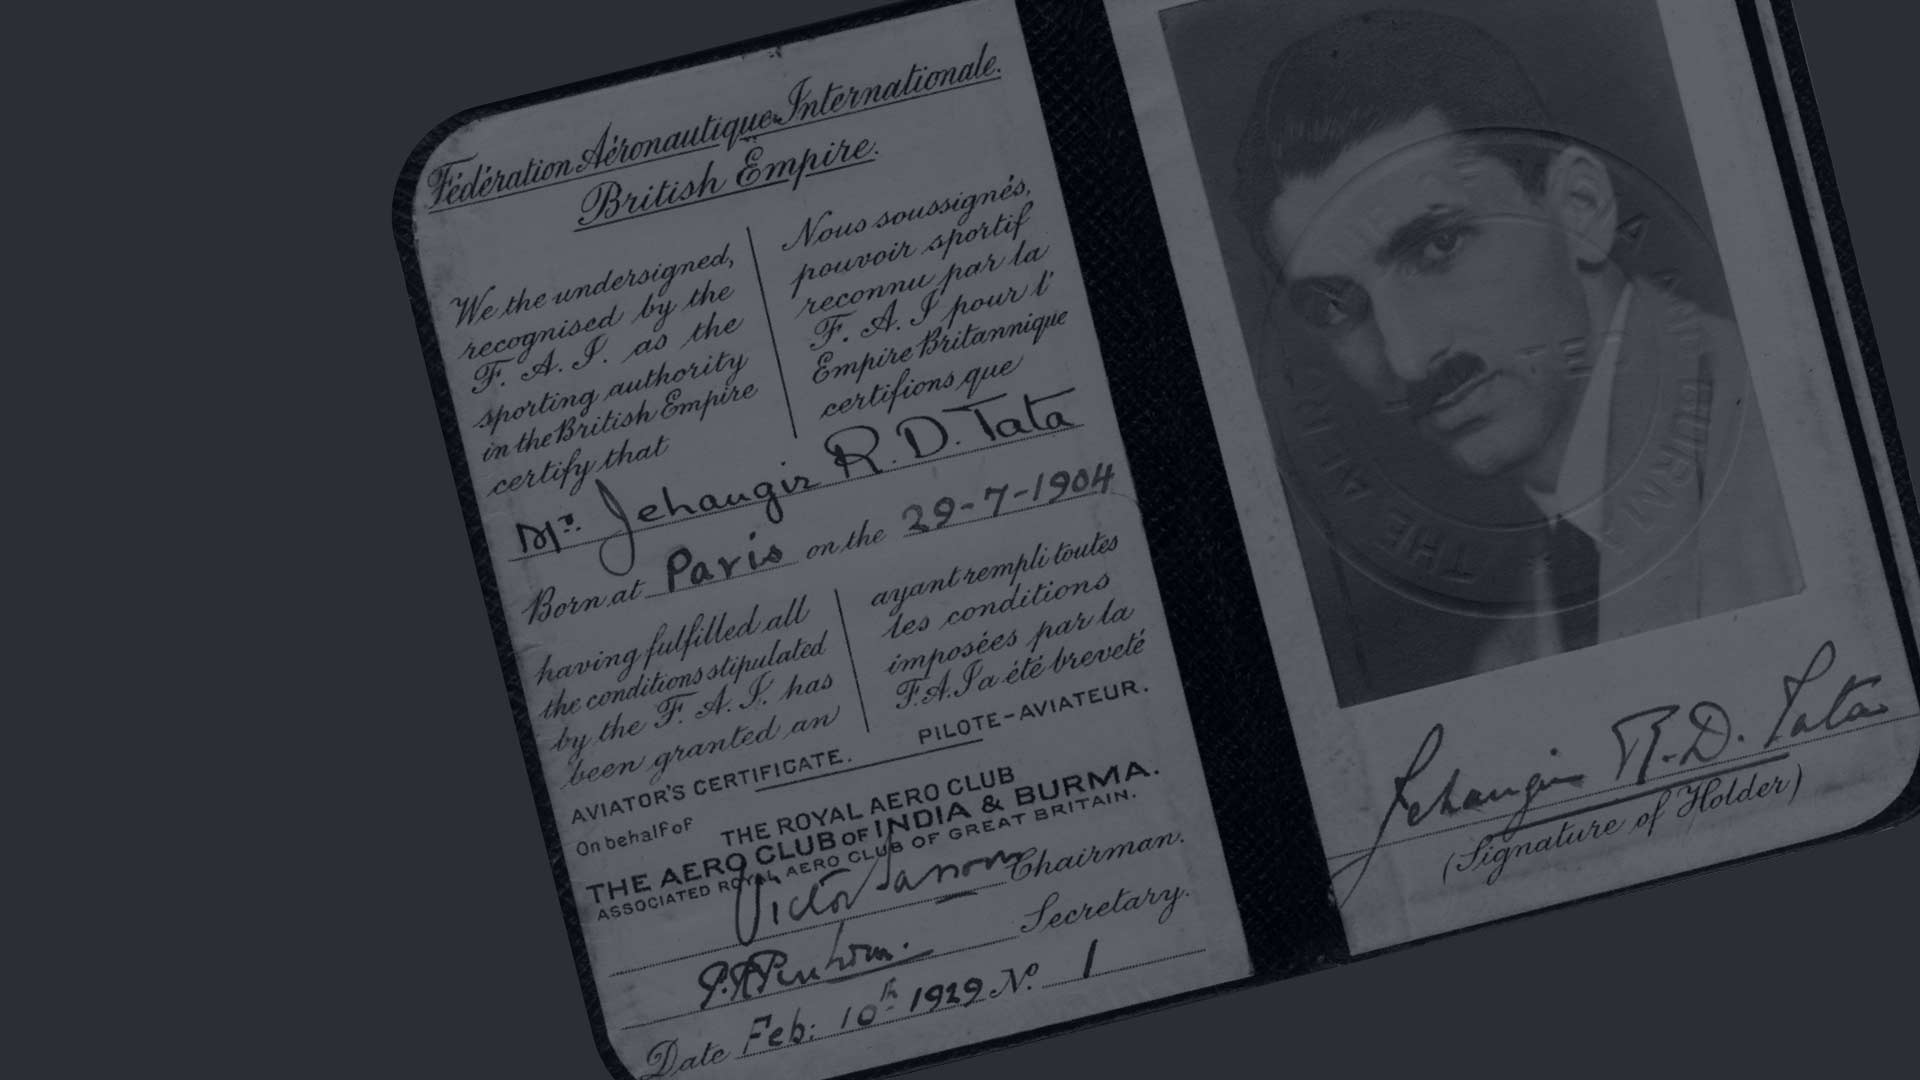 JRD Tata received the first pilot's licence issued in India